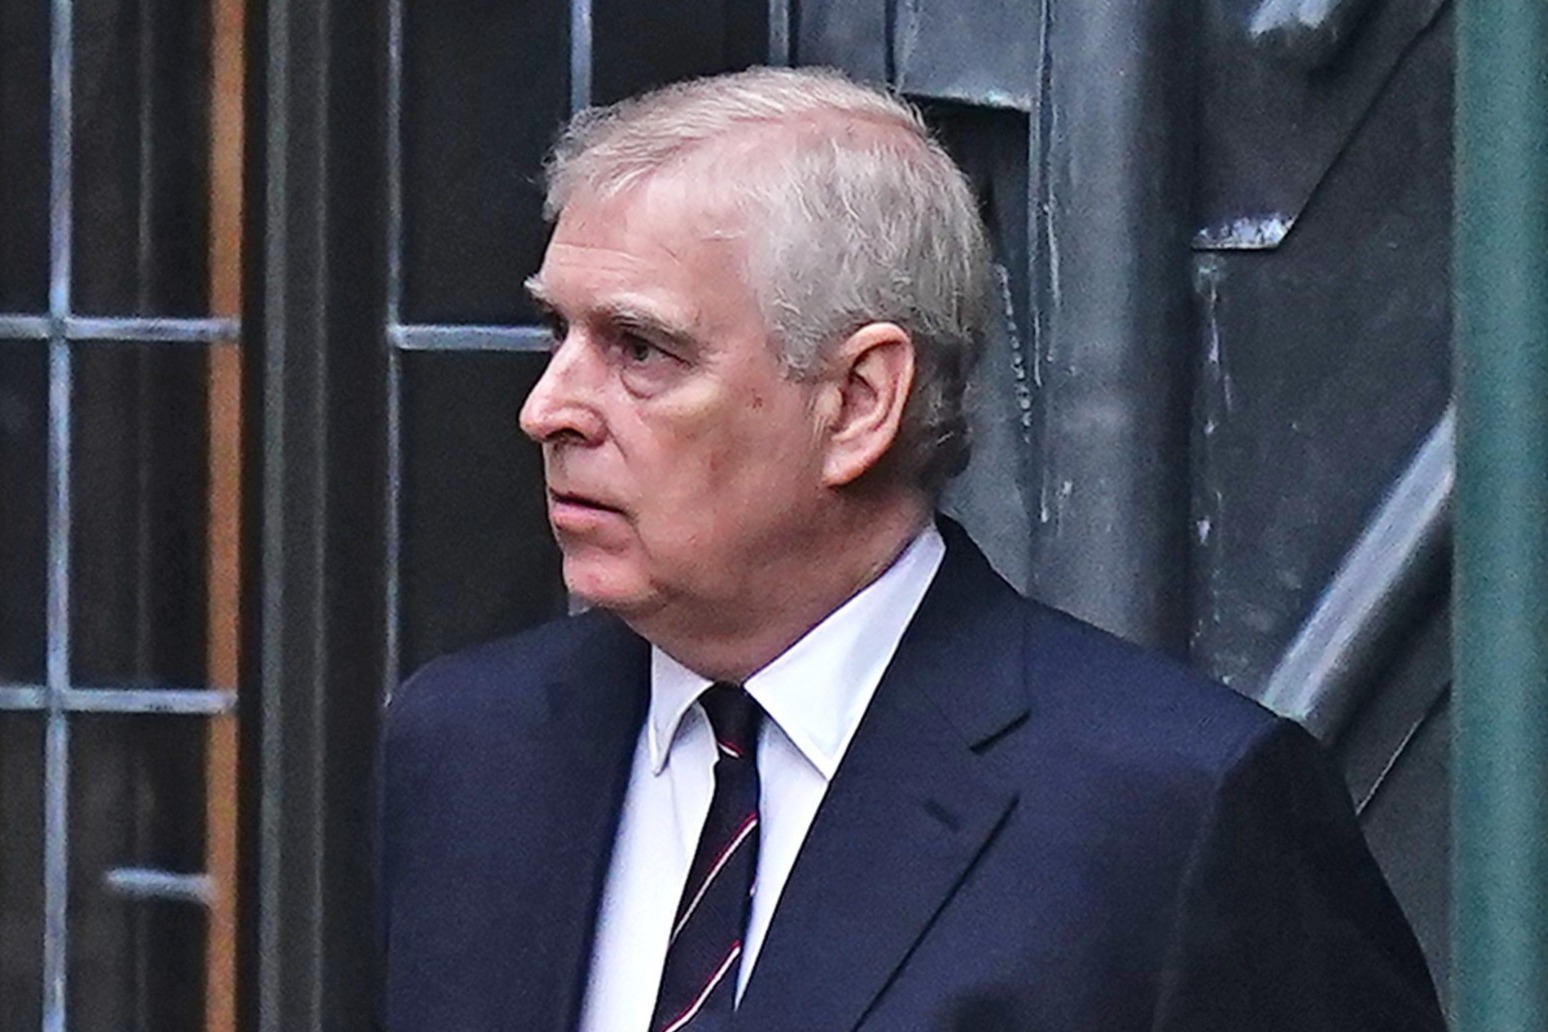 Councillors in York have unanimously voted to remove the Duke of York’s freedom of their city 